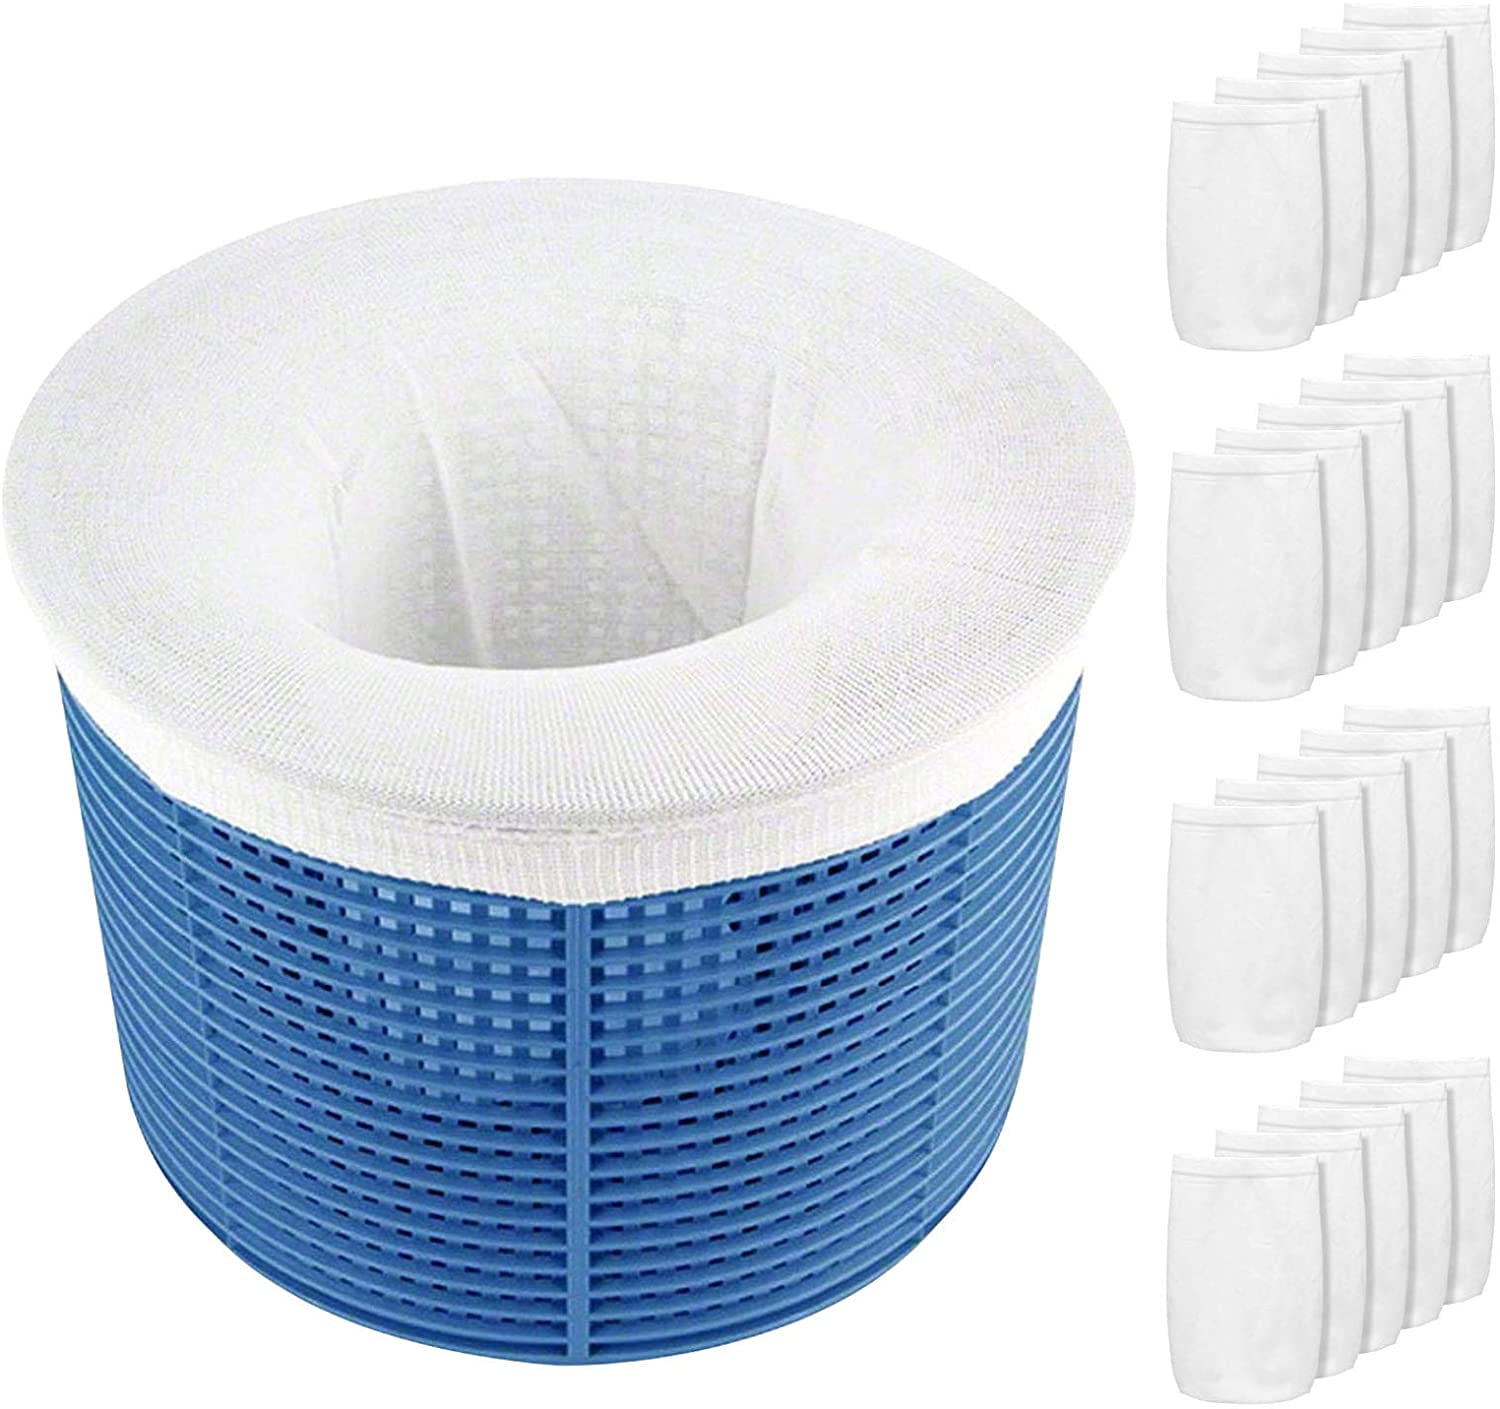 XUEF Pool Skimmer Socks Filters Baskets Swimming Pool Strainer Net Durable Elastic Pool Filter Saver Socks Cleans Debris and Leaves for In-Ground and Above Ground Pools